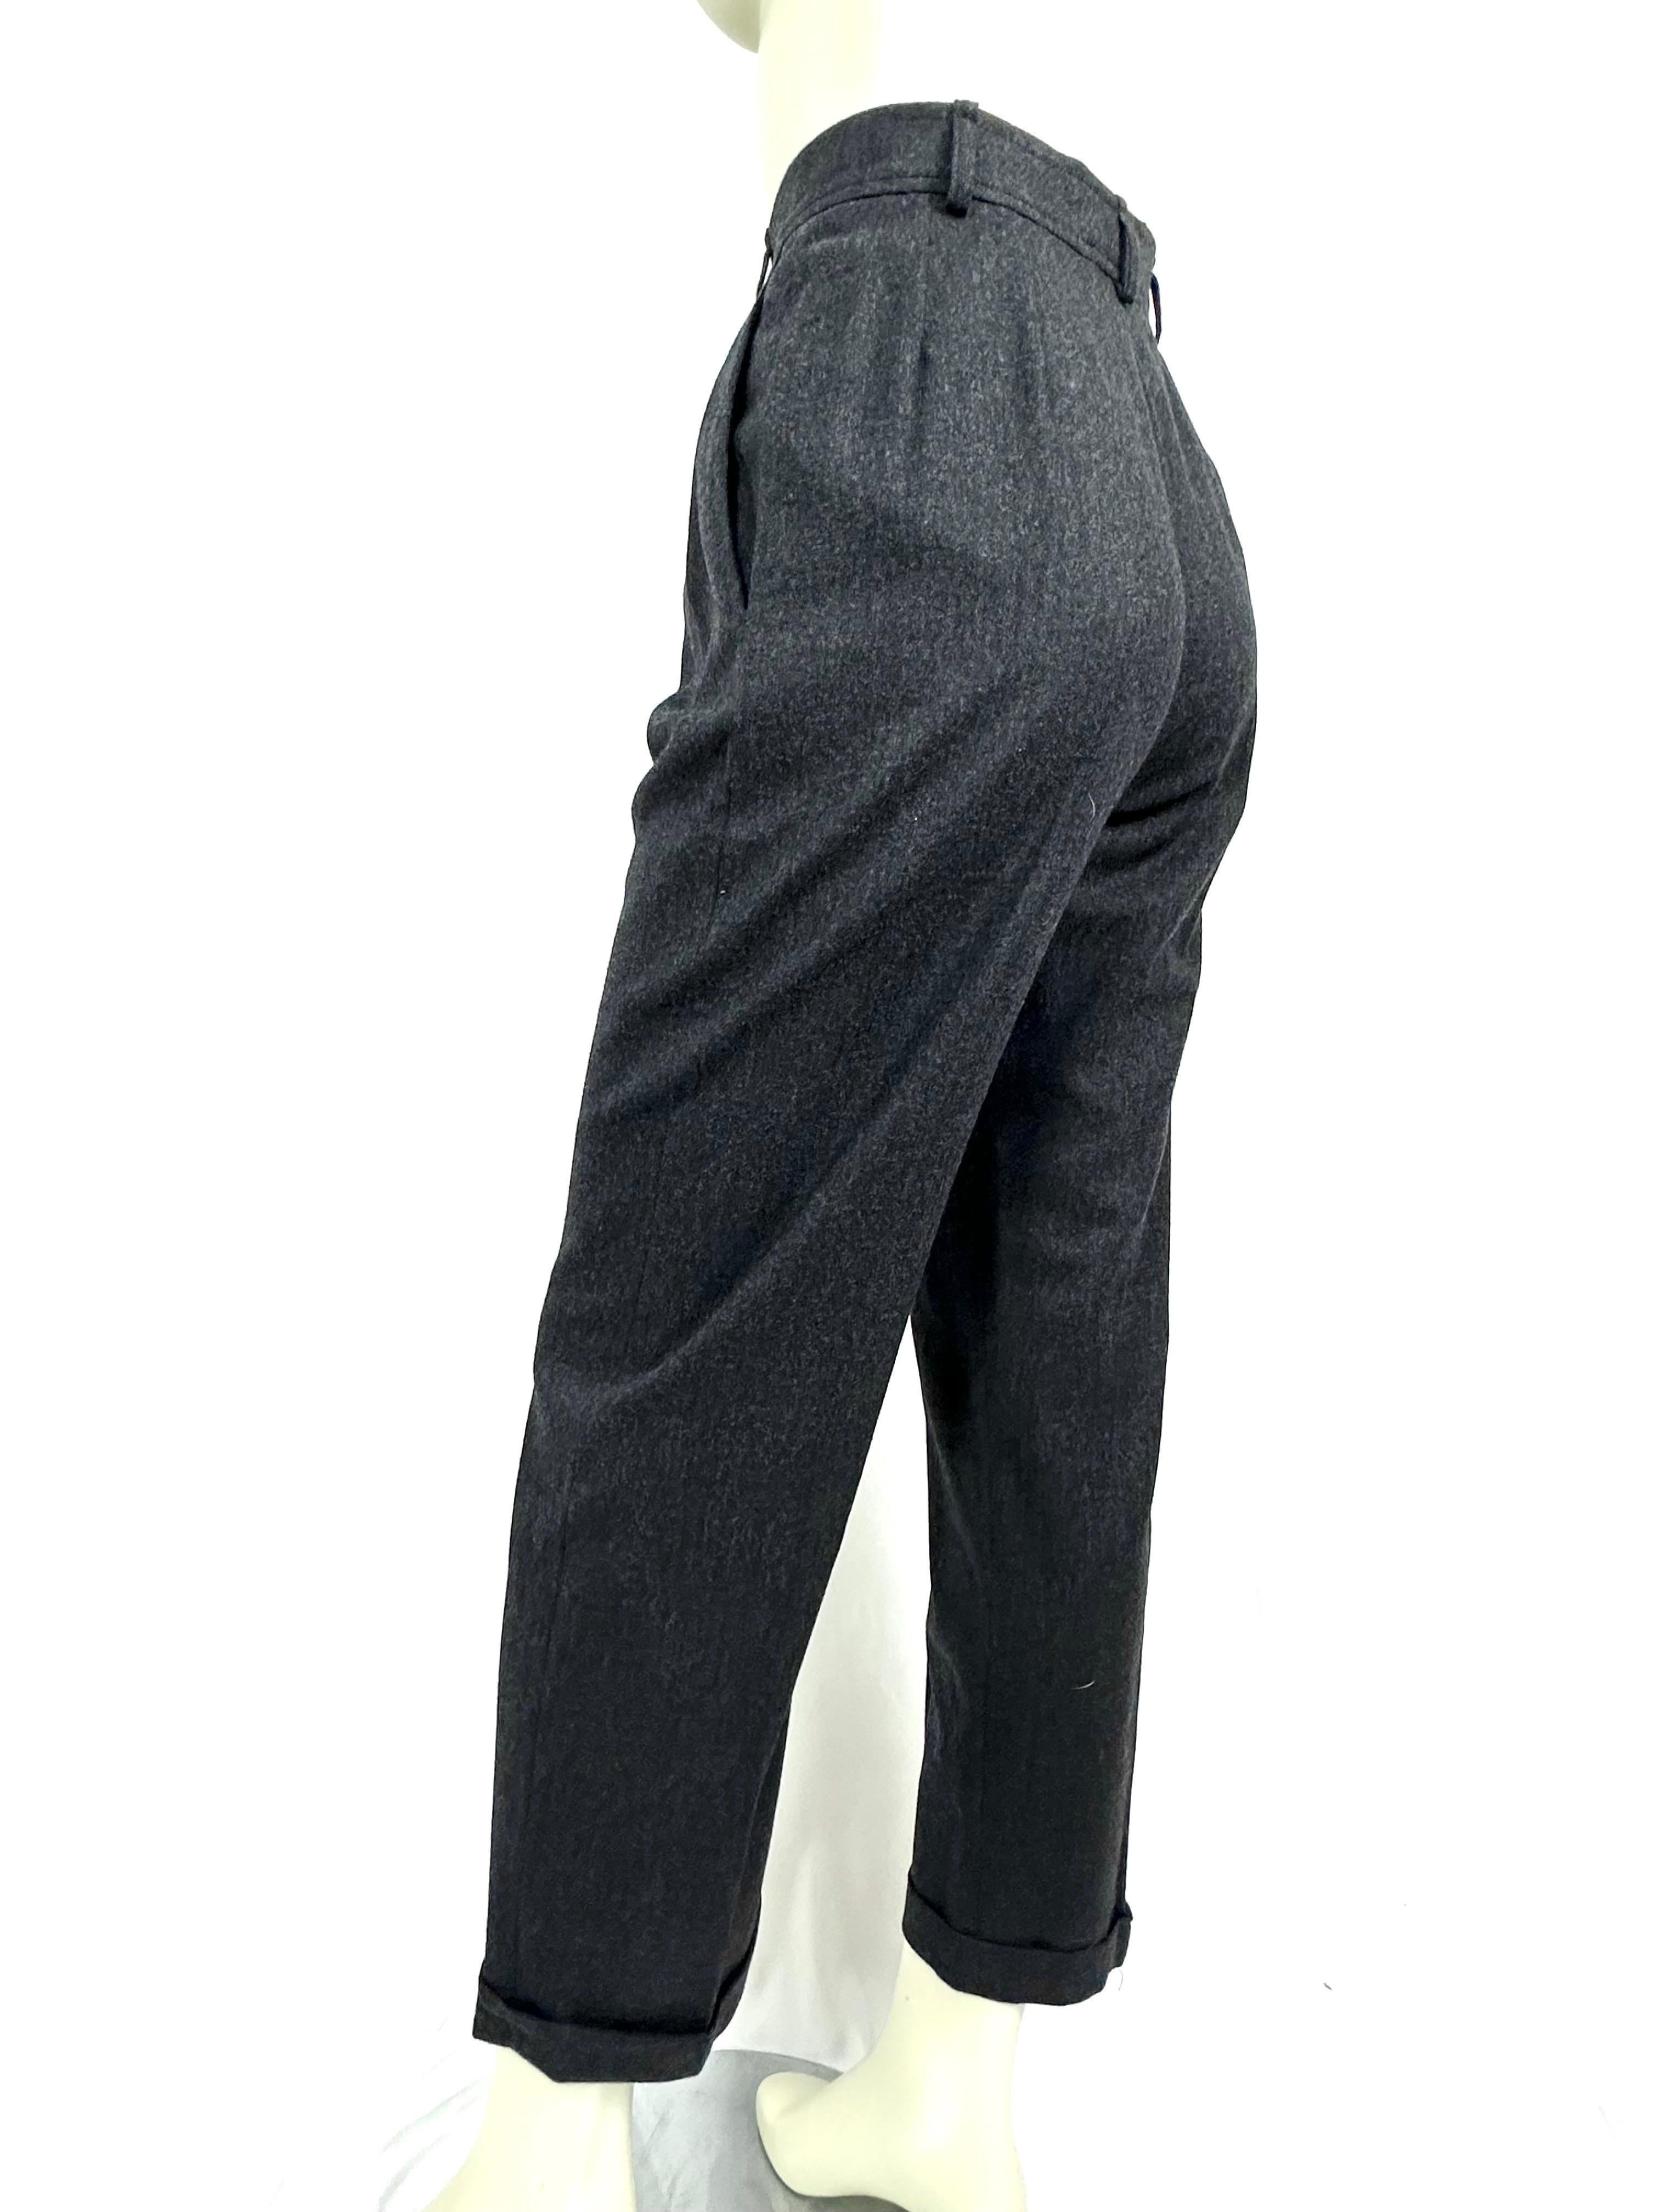 Ysl vintage anthracite gray wool trousers from the 1990s 2